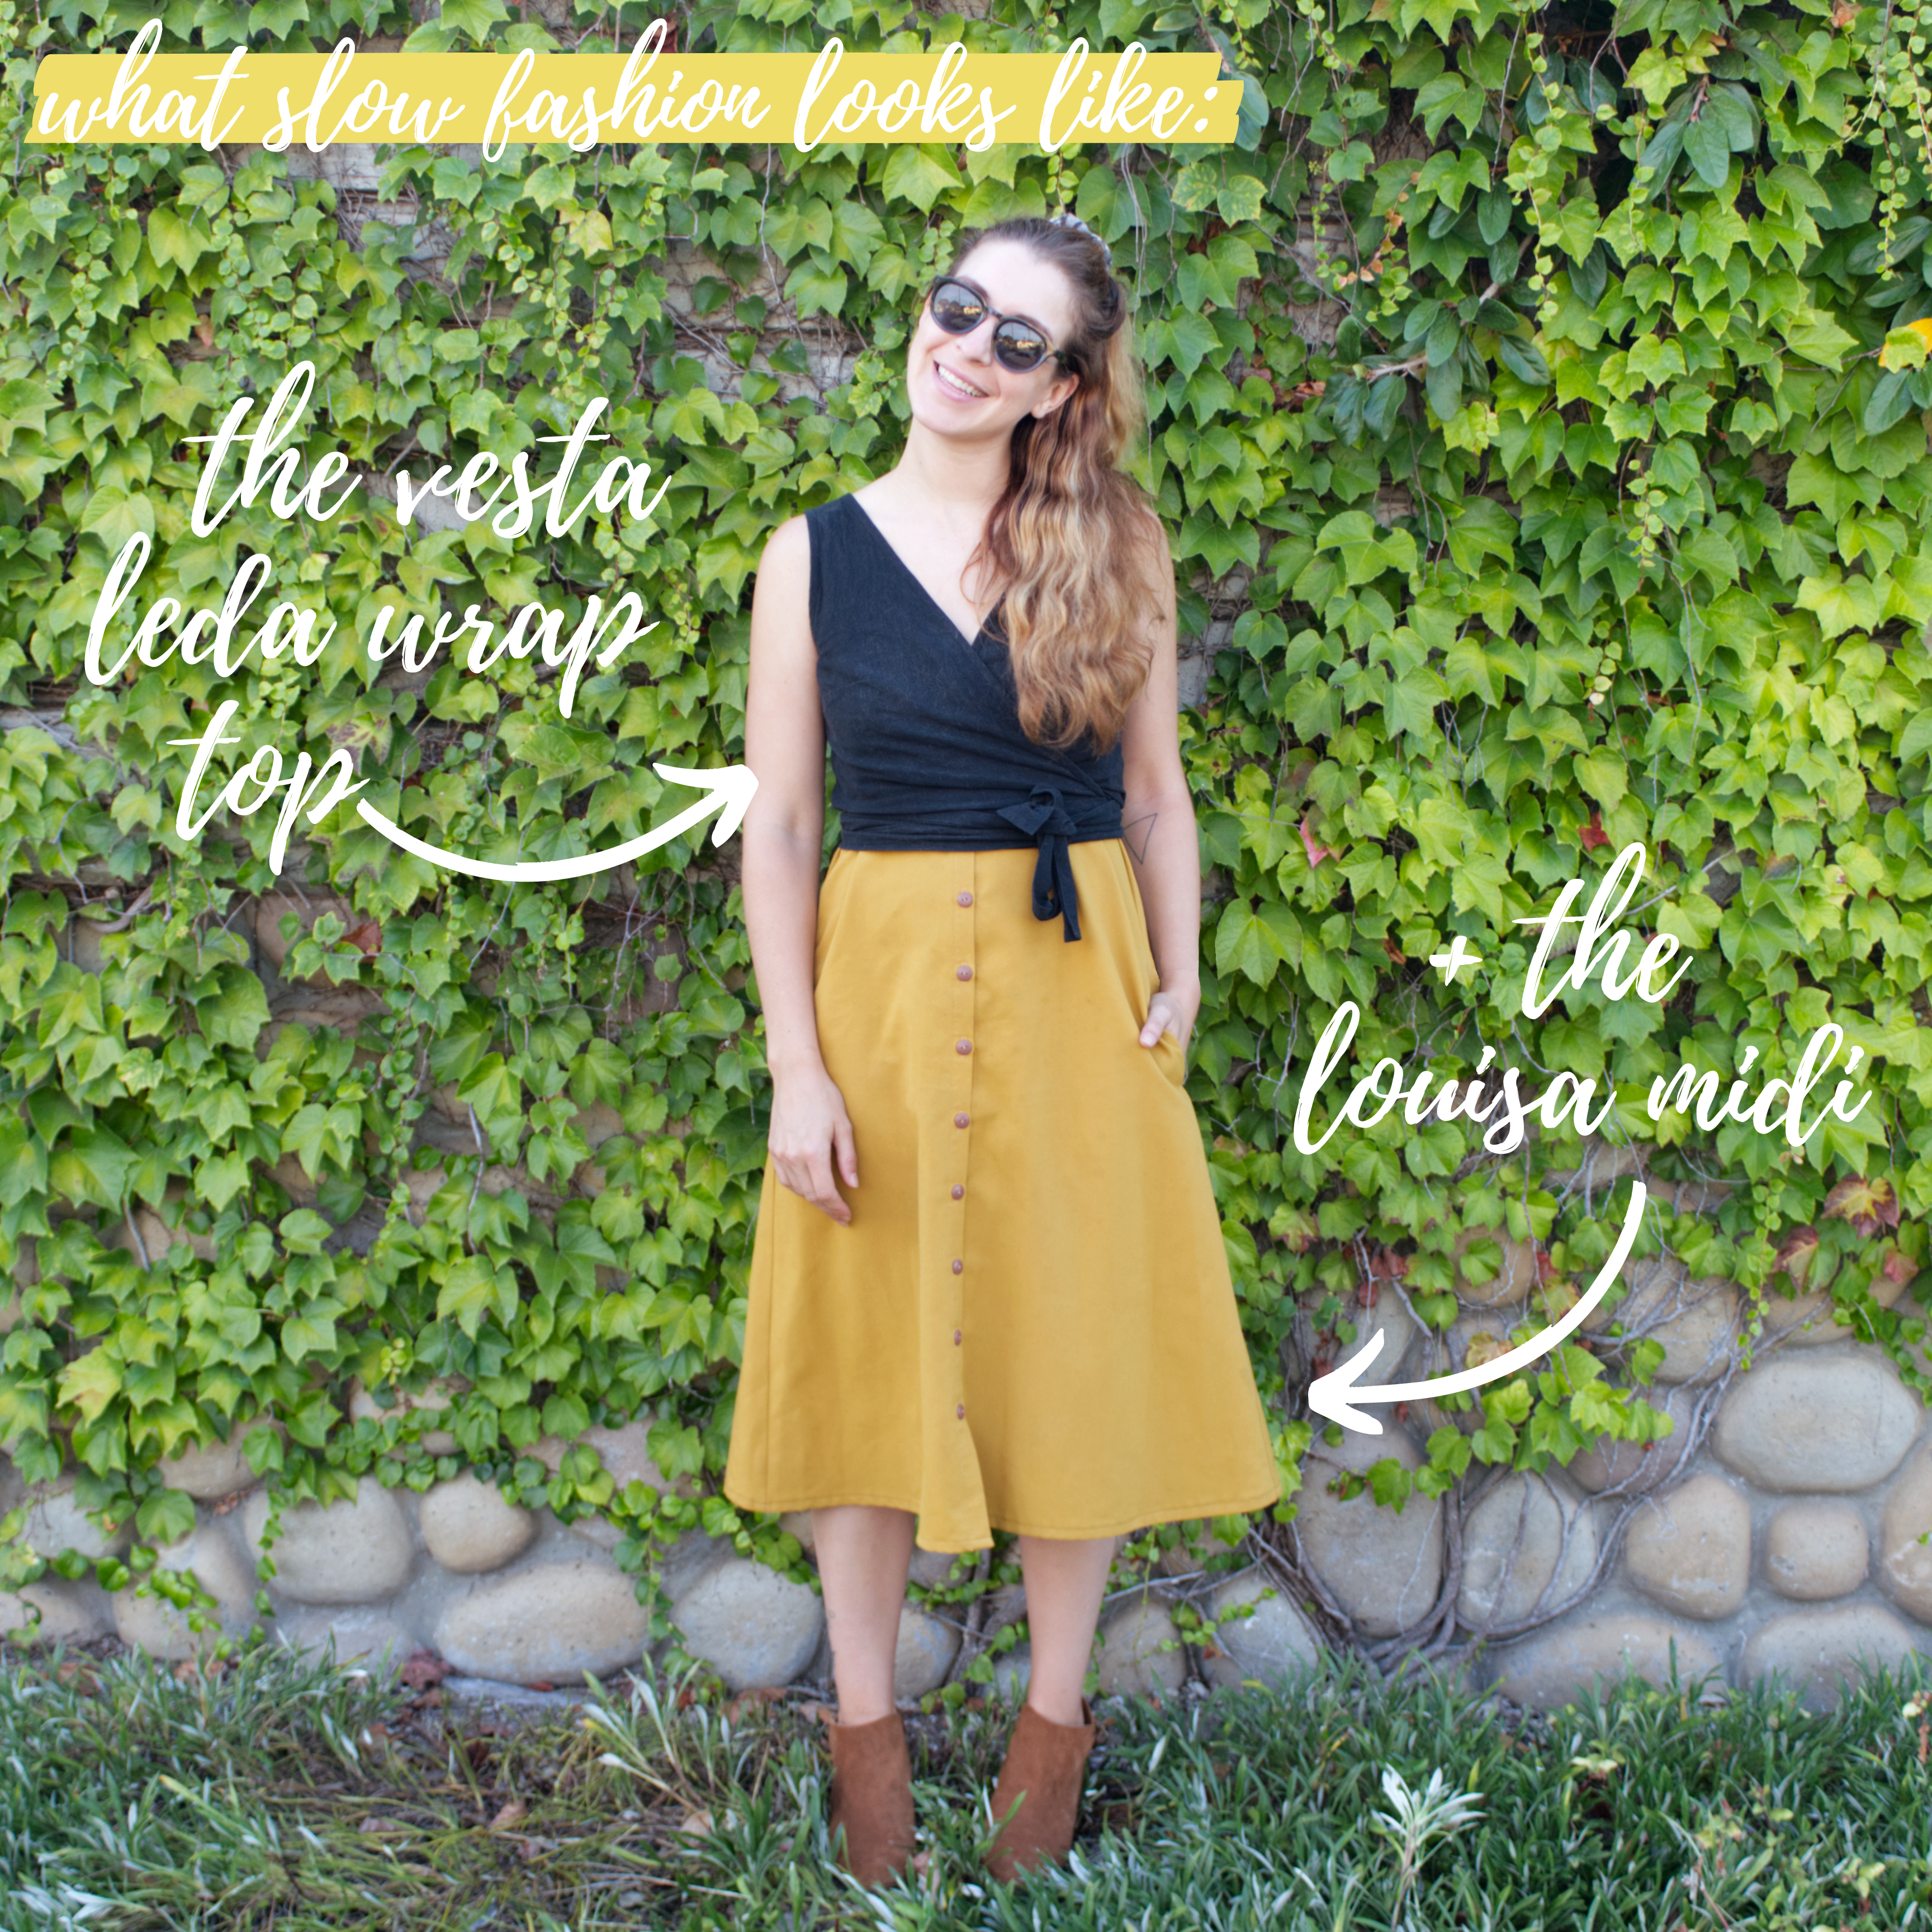 3 Reasons Why It's Time To Stop Buying Fast Fashion: The Vesta Leda Wrap Top + The Louisa Midi